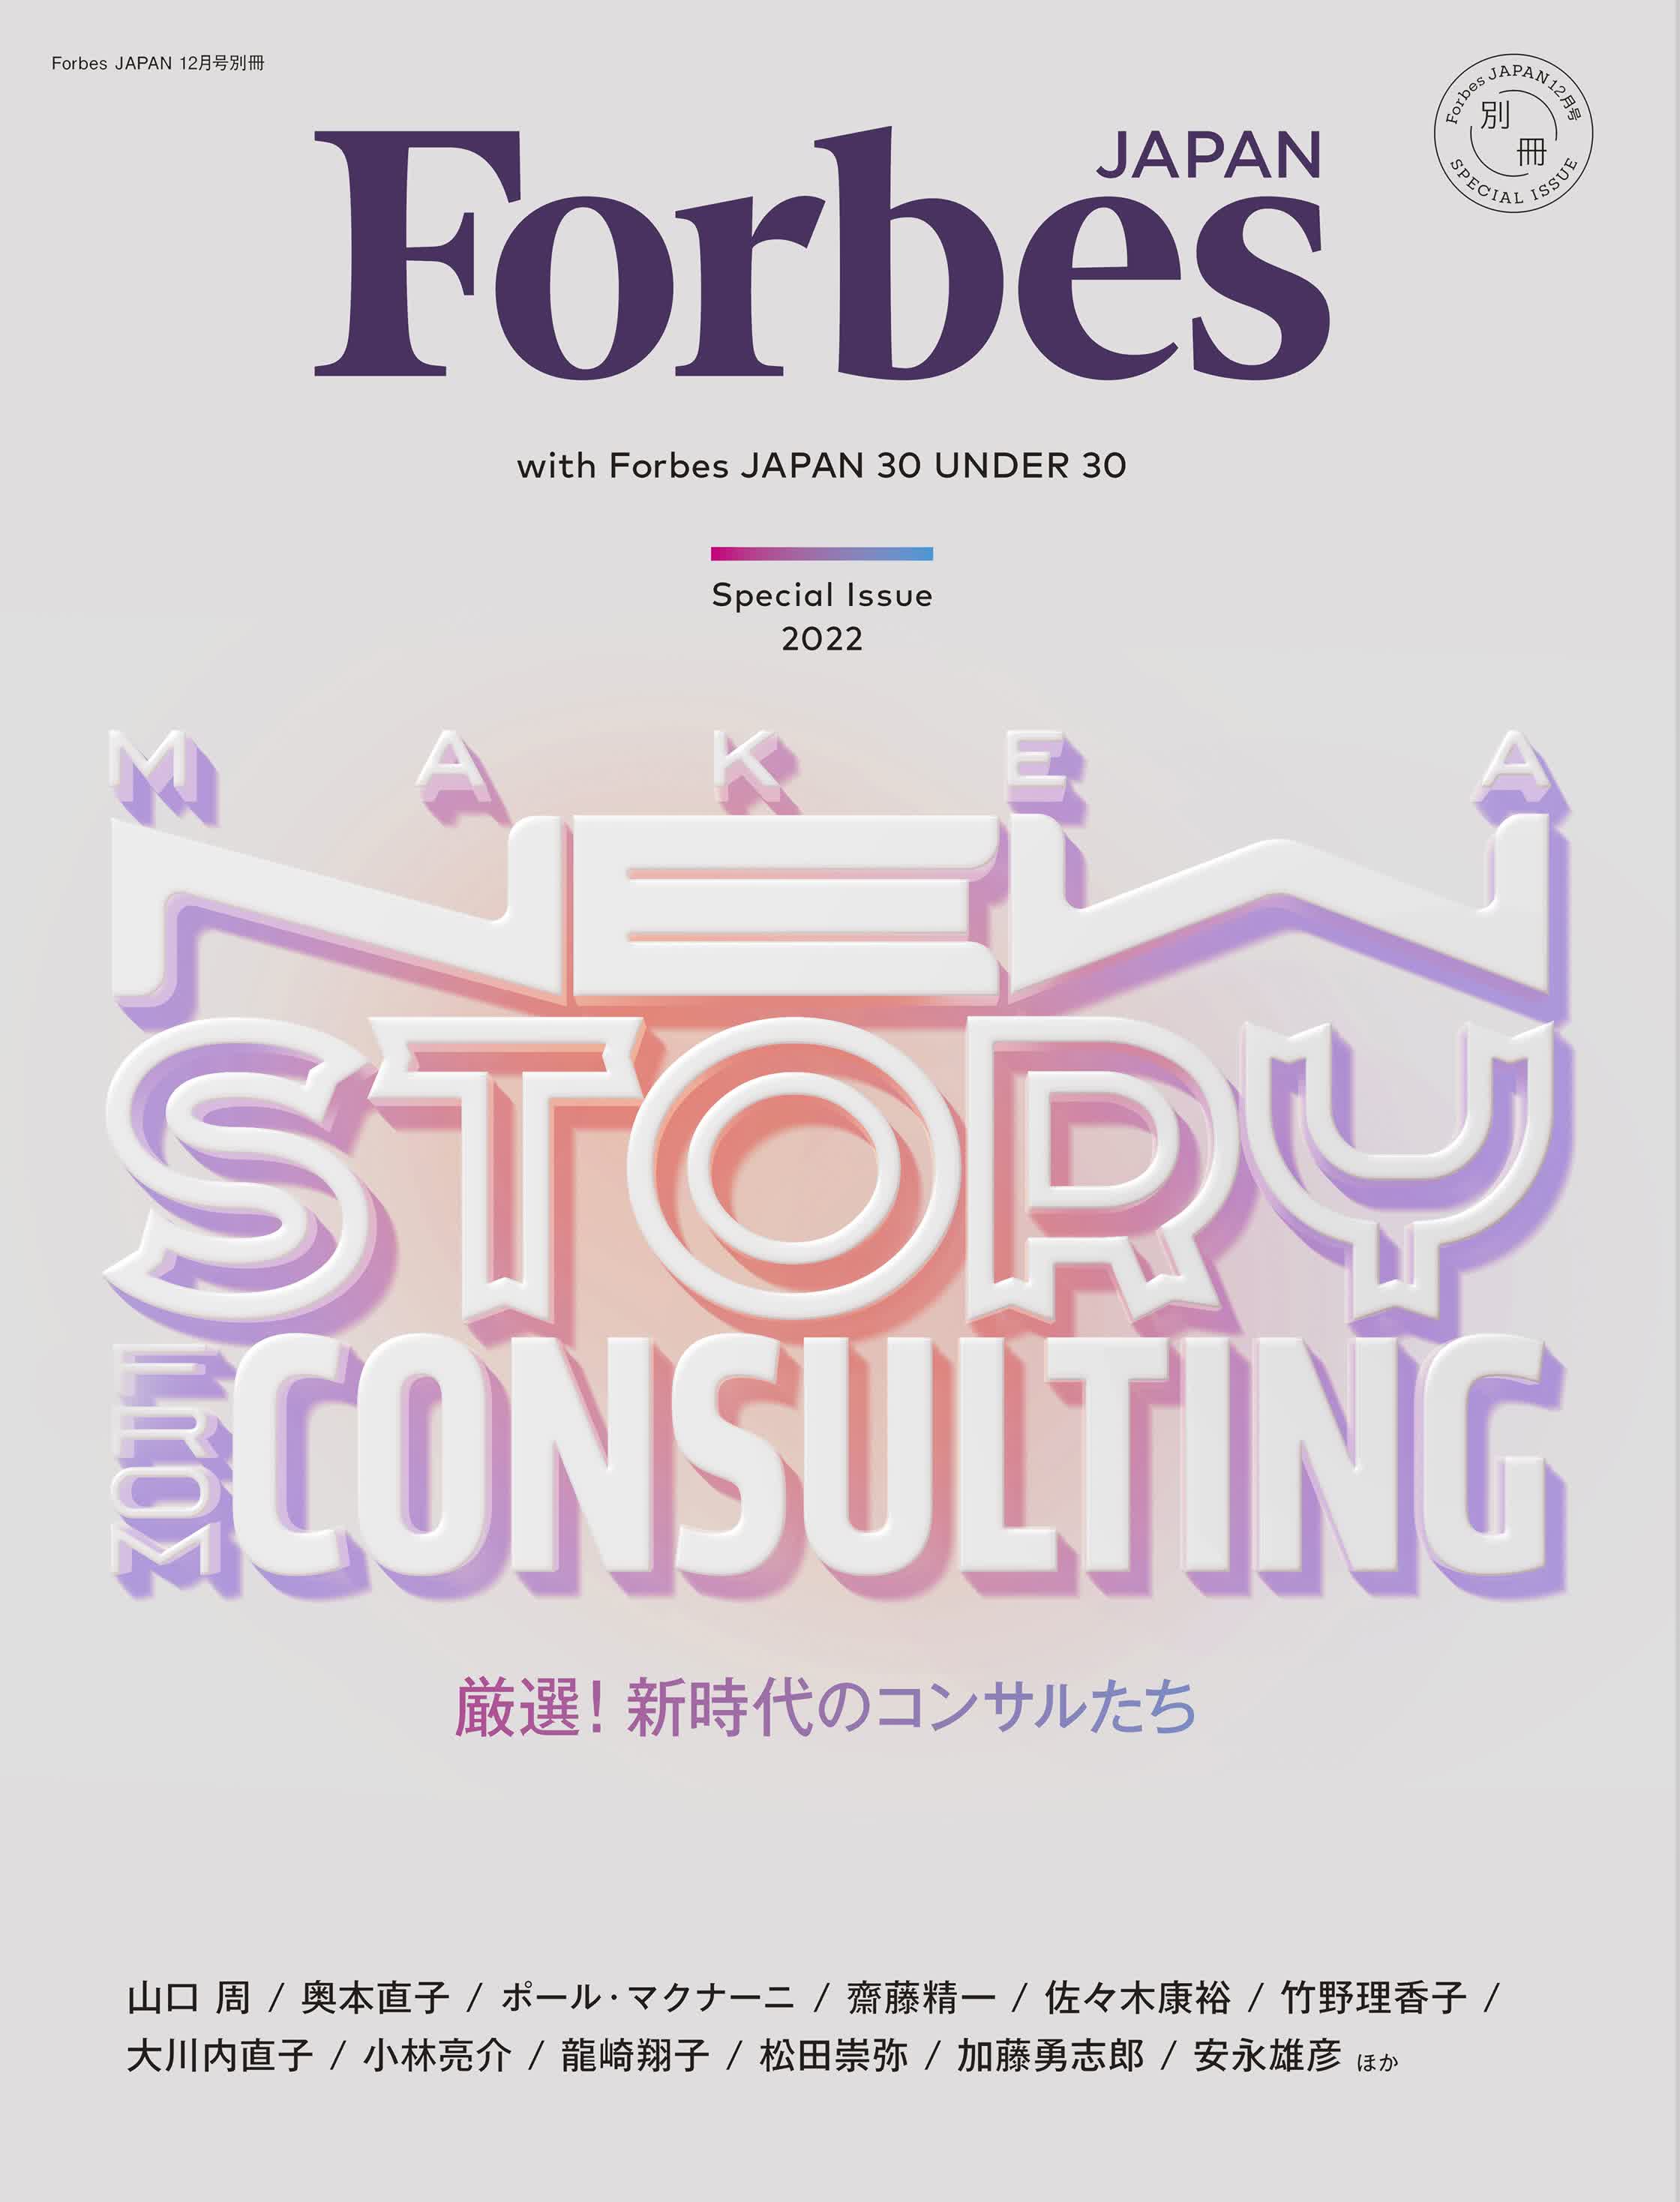 Consulting Forbes Japan.jpg